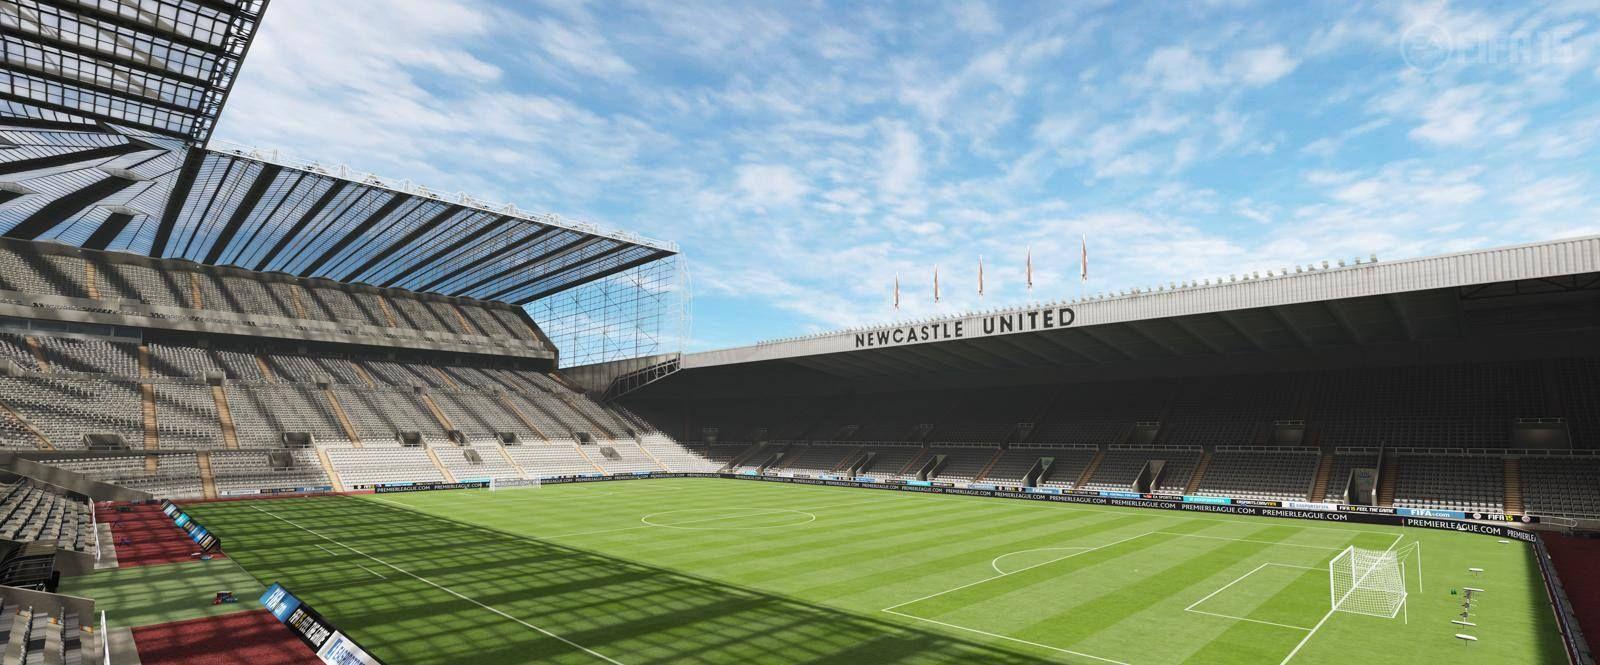 Image for Free St James Park Newcastle FIFA Video Game HD